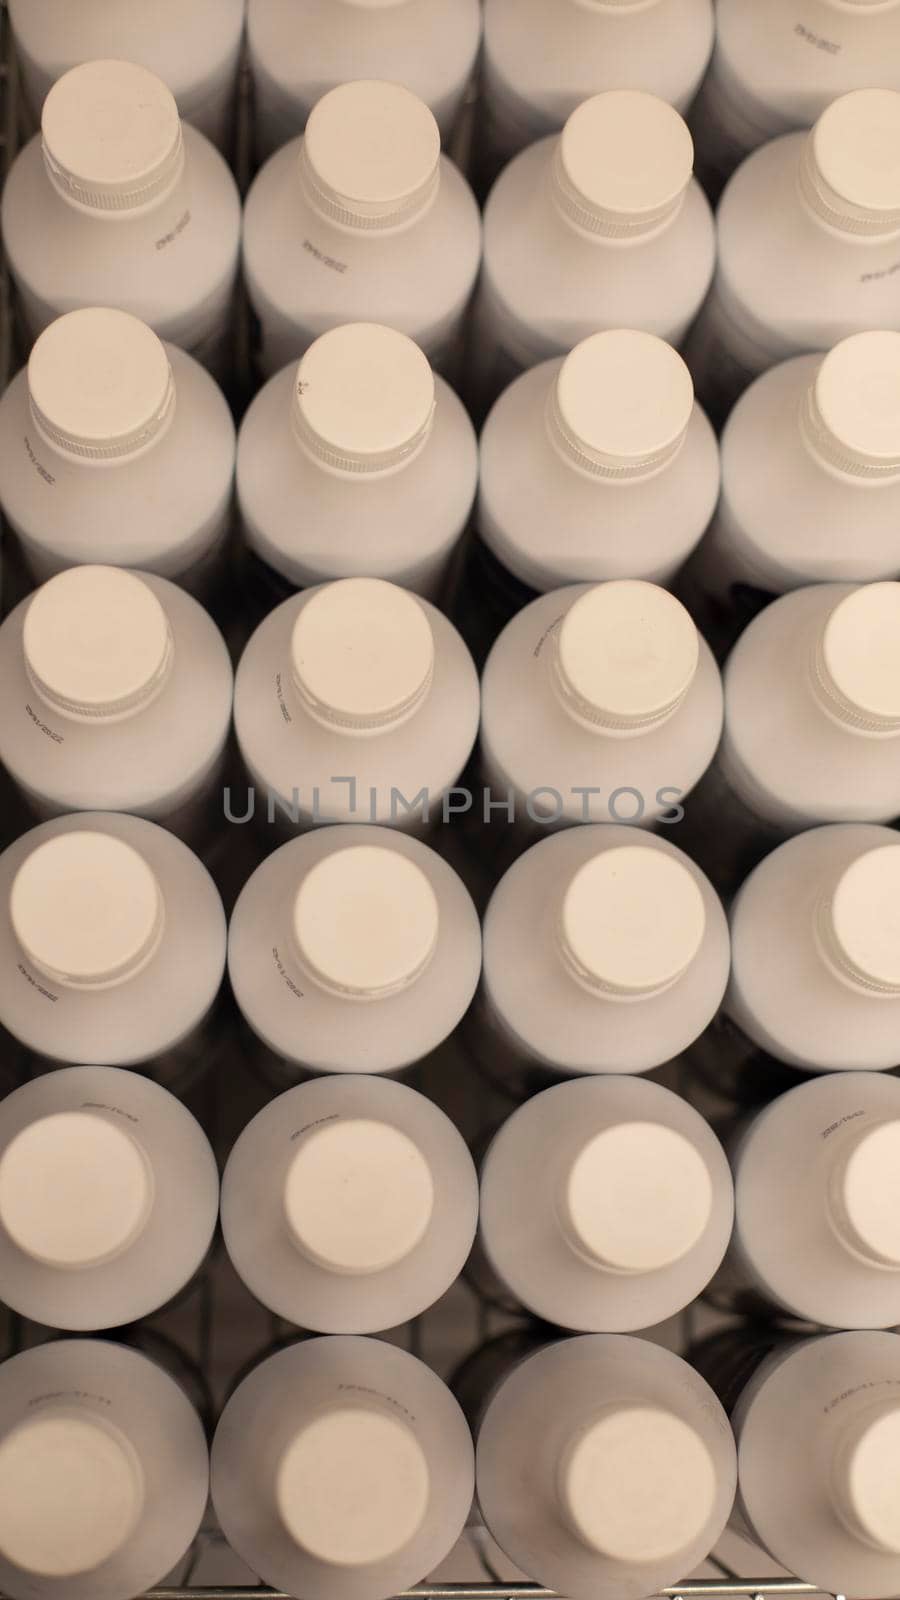 White plastic bottles top view. Lots of milk bottles. Texture from beverage containers.